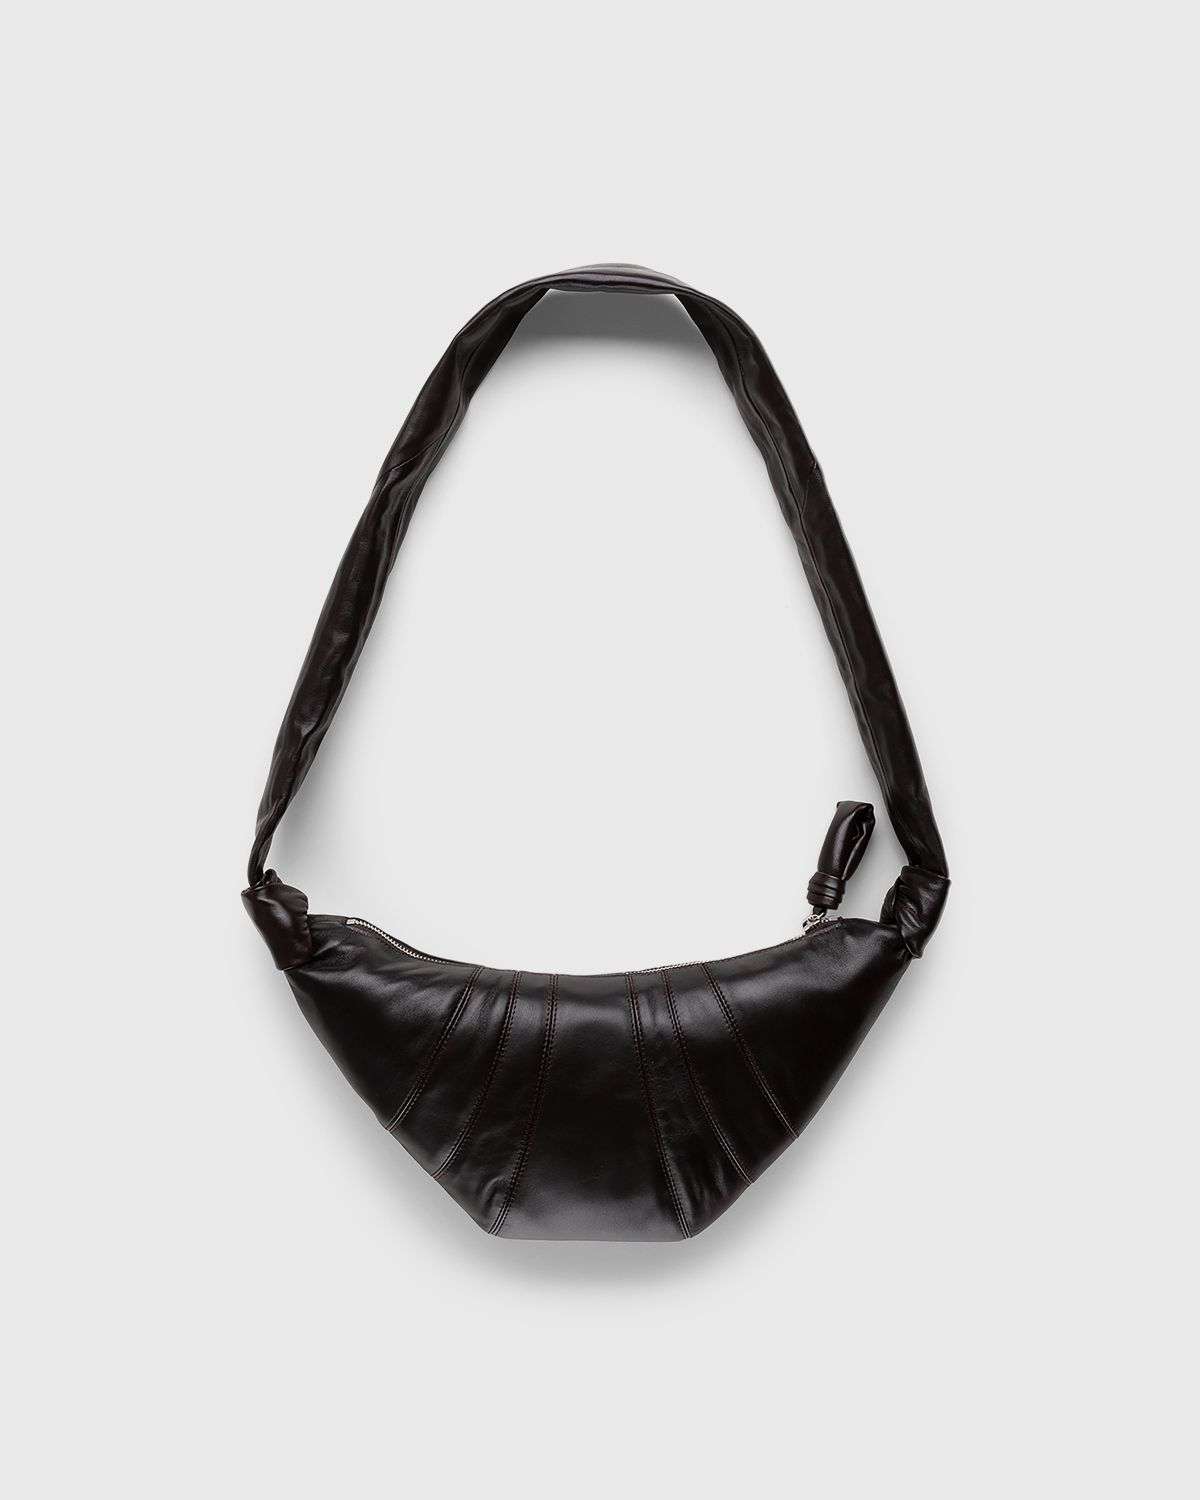 Lemaire x Highsnobiety – Not In Paris 4 Small Croissant Bag Dark Chocolate - Bags - Black - Image 2